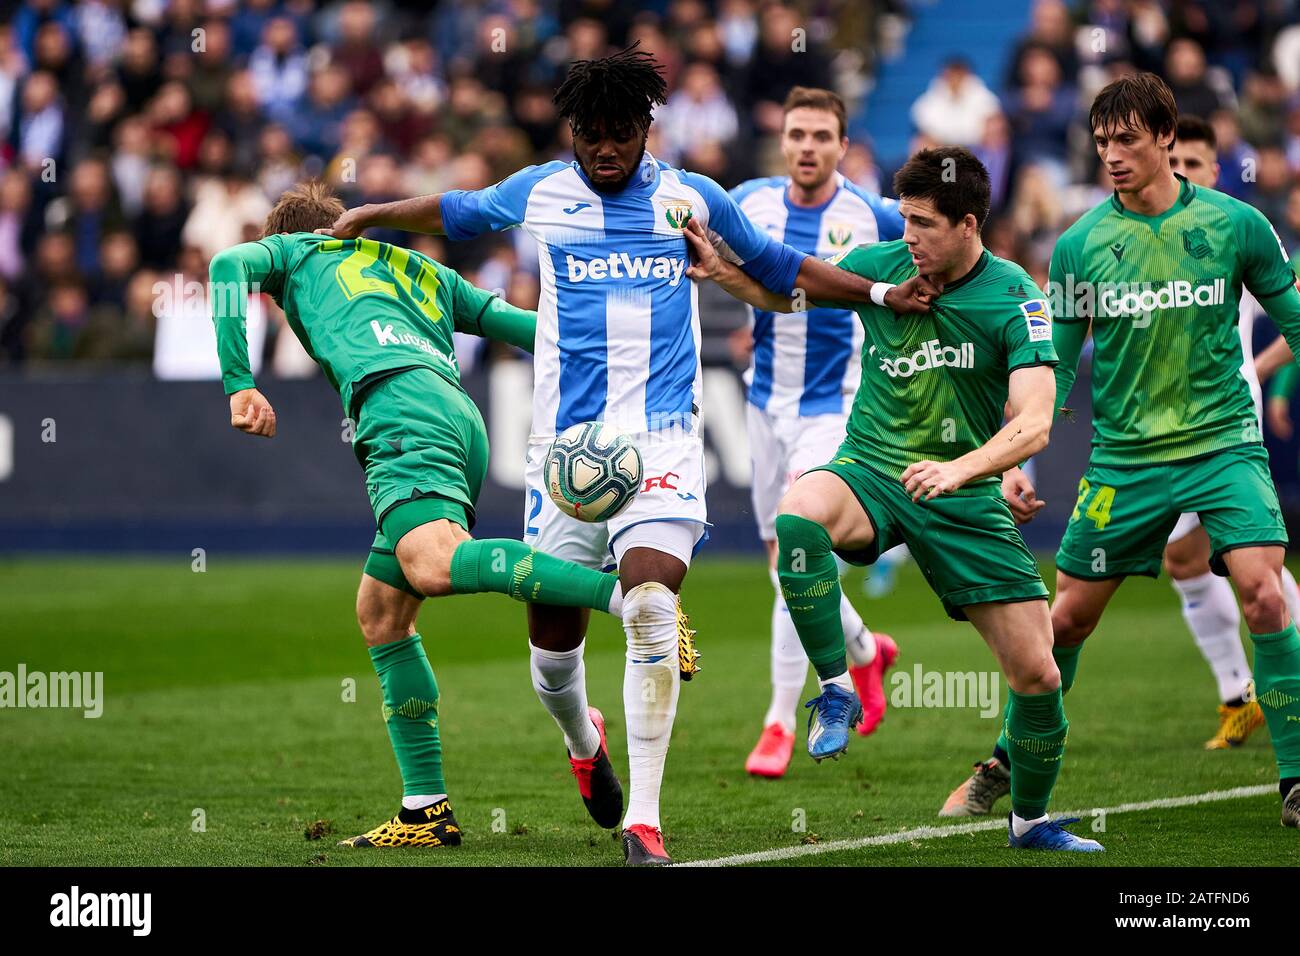 Chidozie Collins Awaziem of CD Leganes and Igor Zubeldia of Real Sociedad are seen in action during the La Liga football match between CD Leganes and Real Sociedad at Butarque Stadium in Leganes.(Final score; CD Leganes 2:1Real Sociedad) Stock Photo